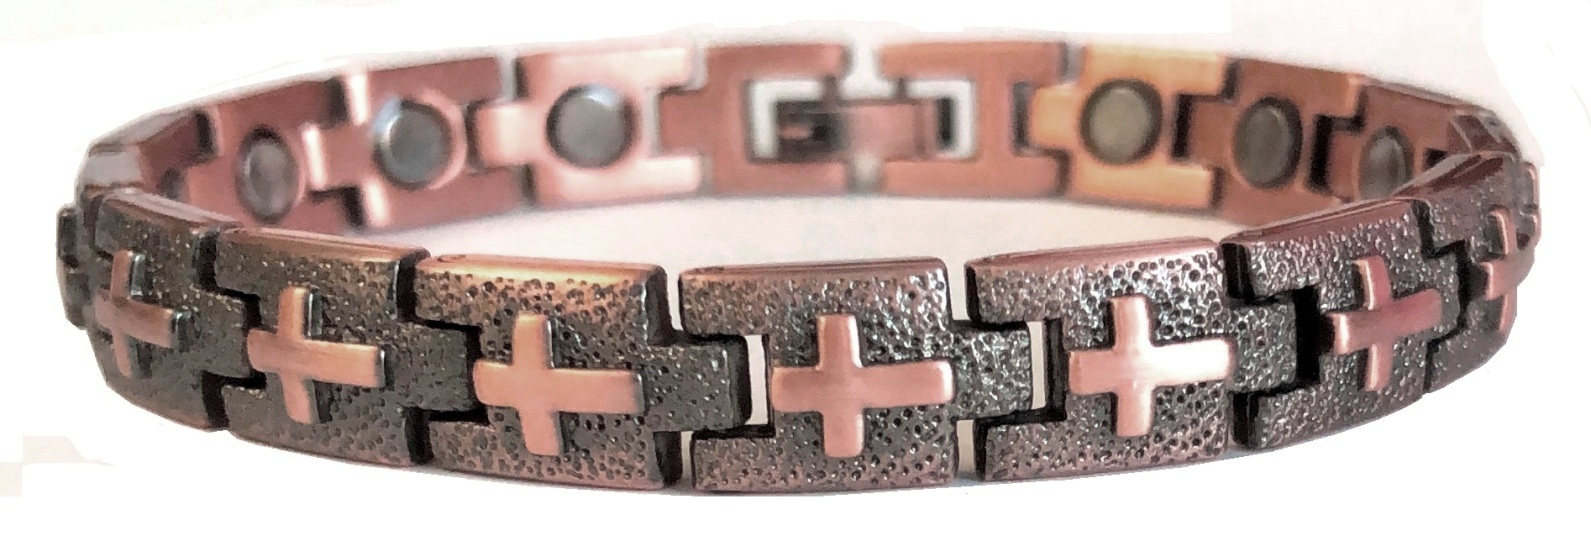 Copper Magnetic Therapy Bracelet #MBC132